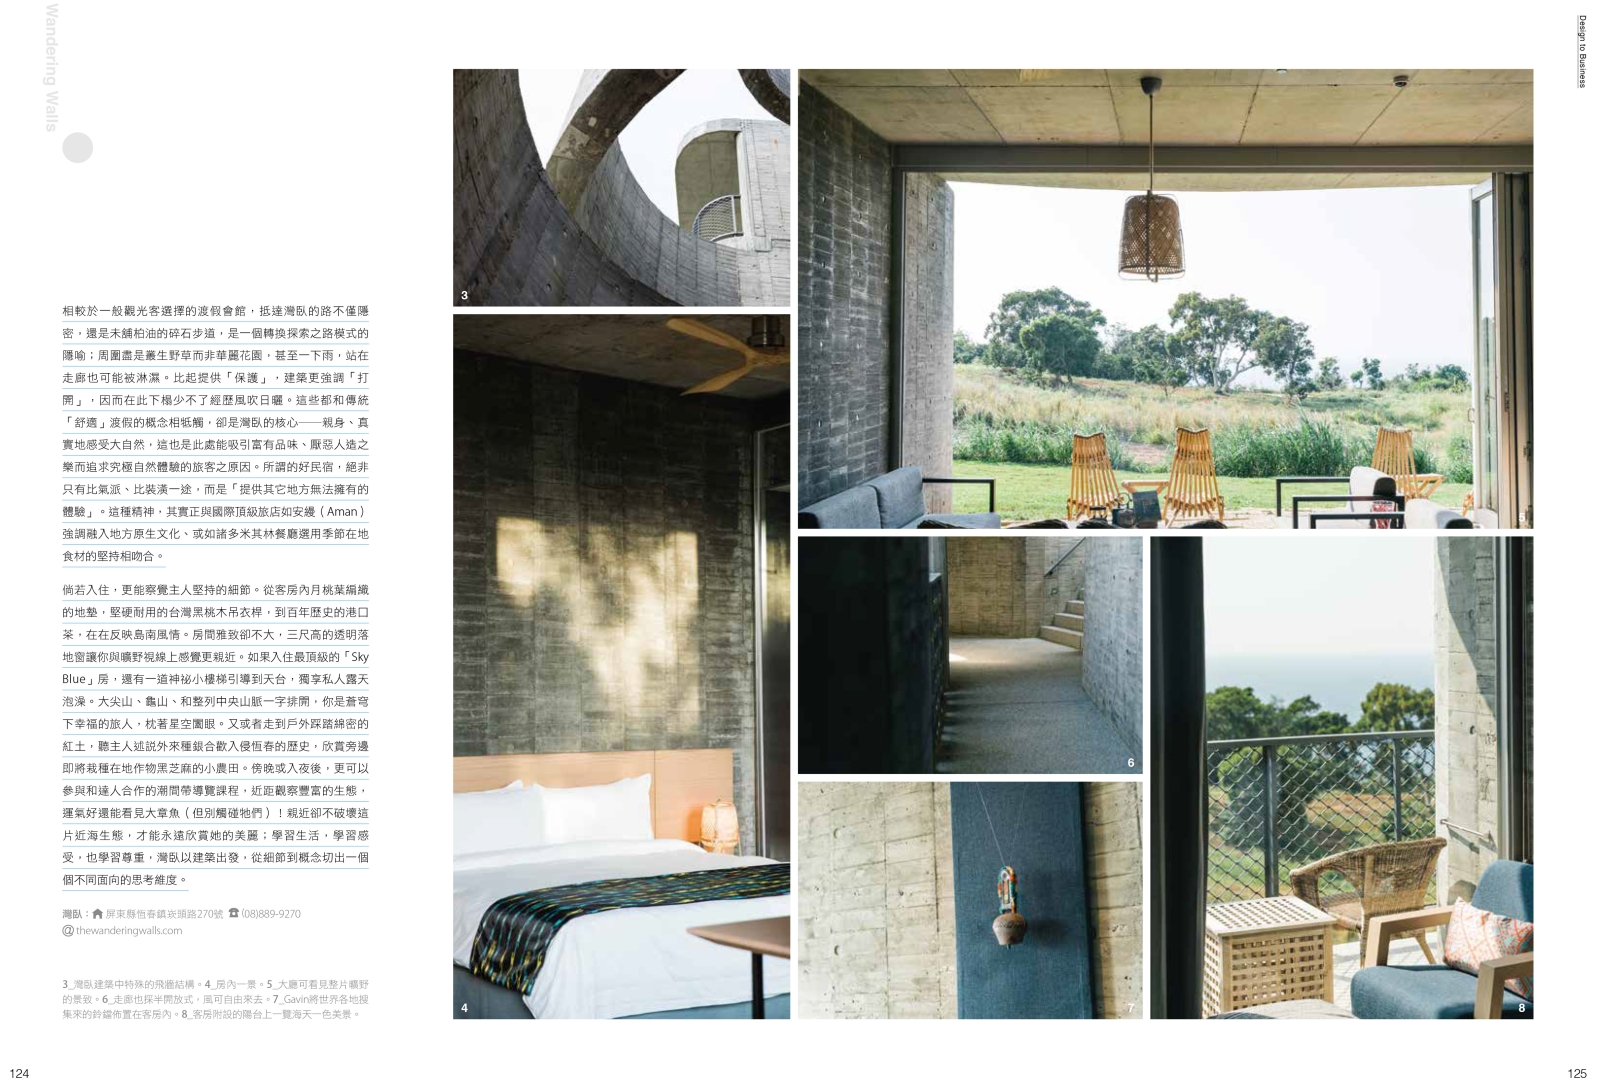 Shopping Design magazine reported the Wandering Walls